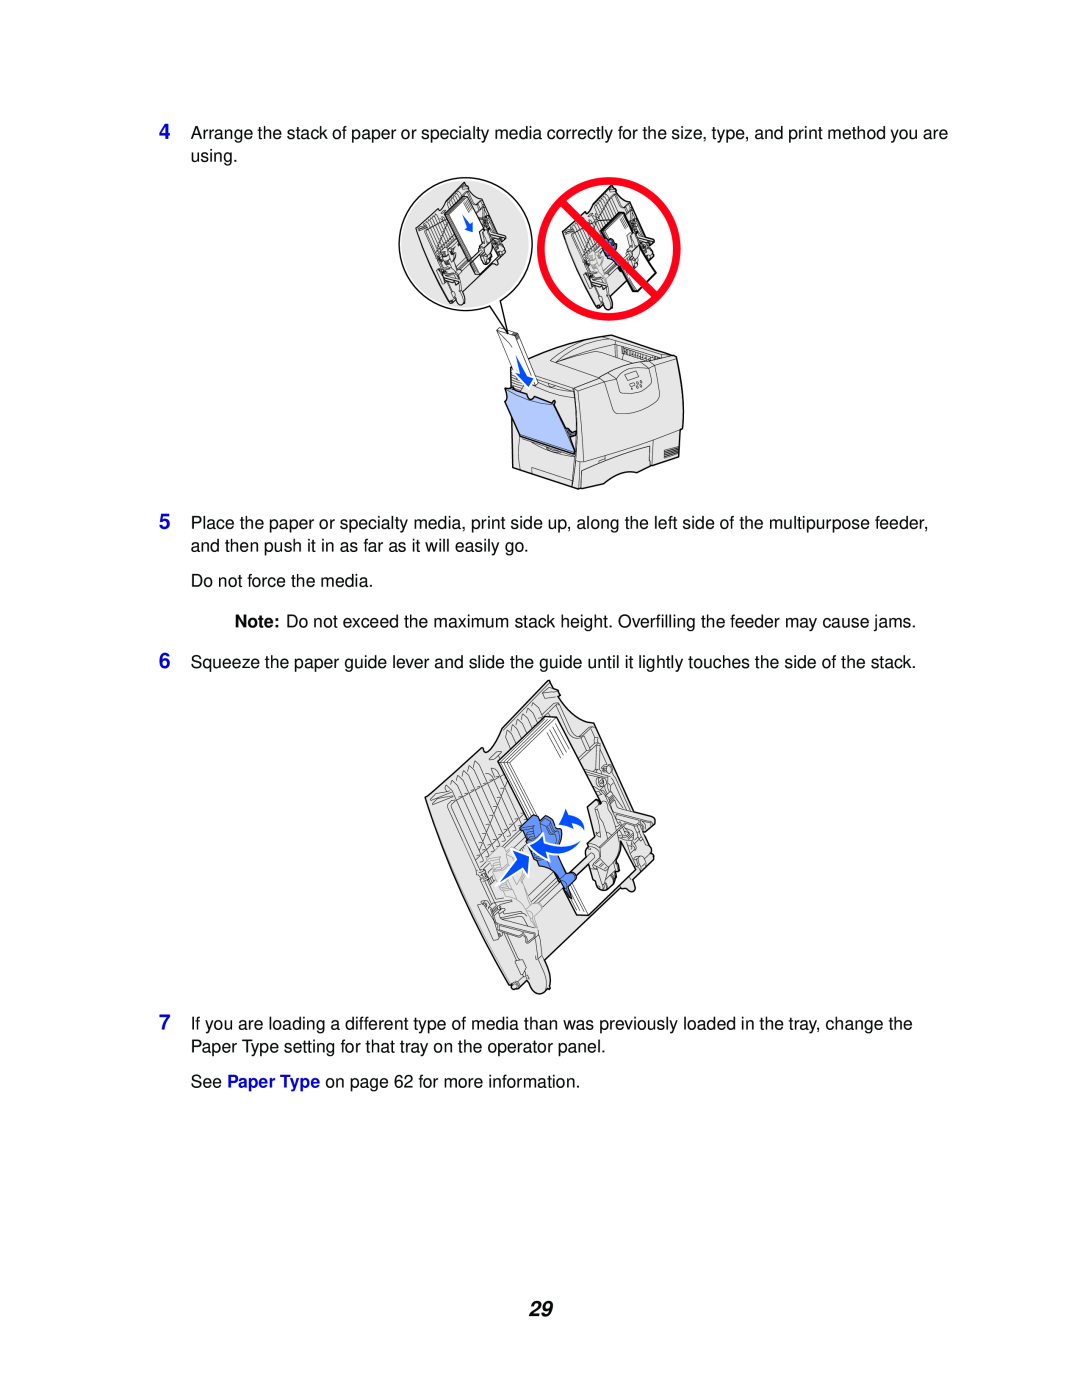 Lexmark 762 manual Do not force the media 